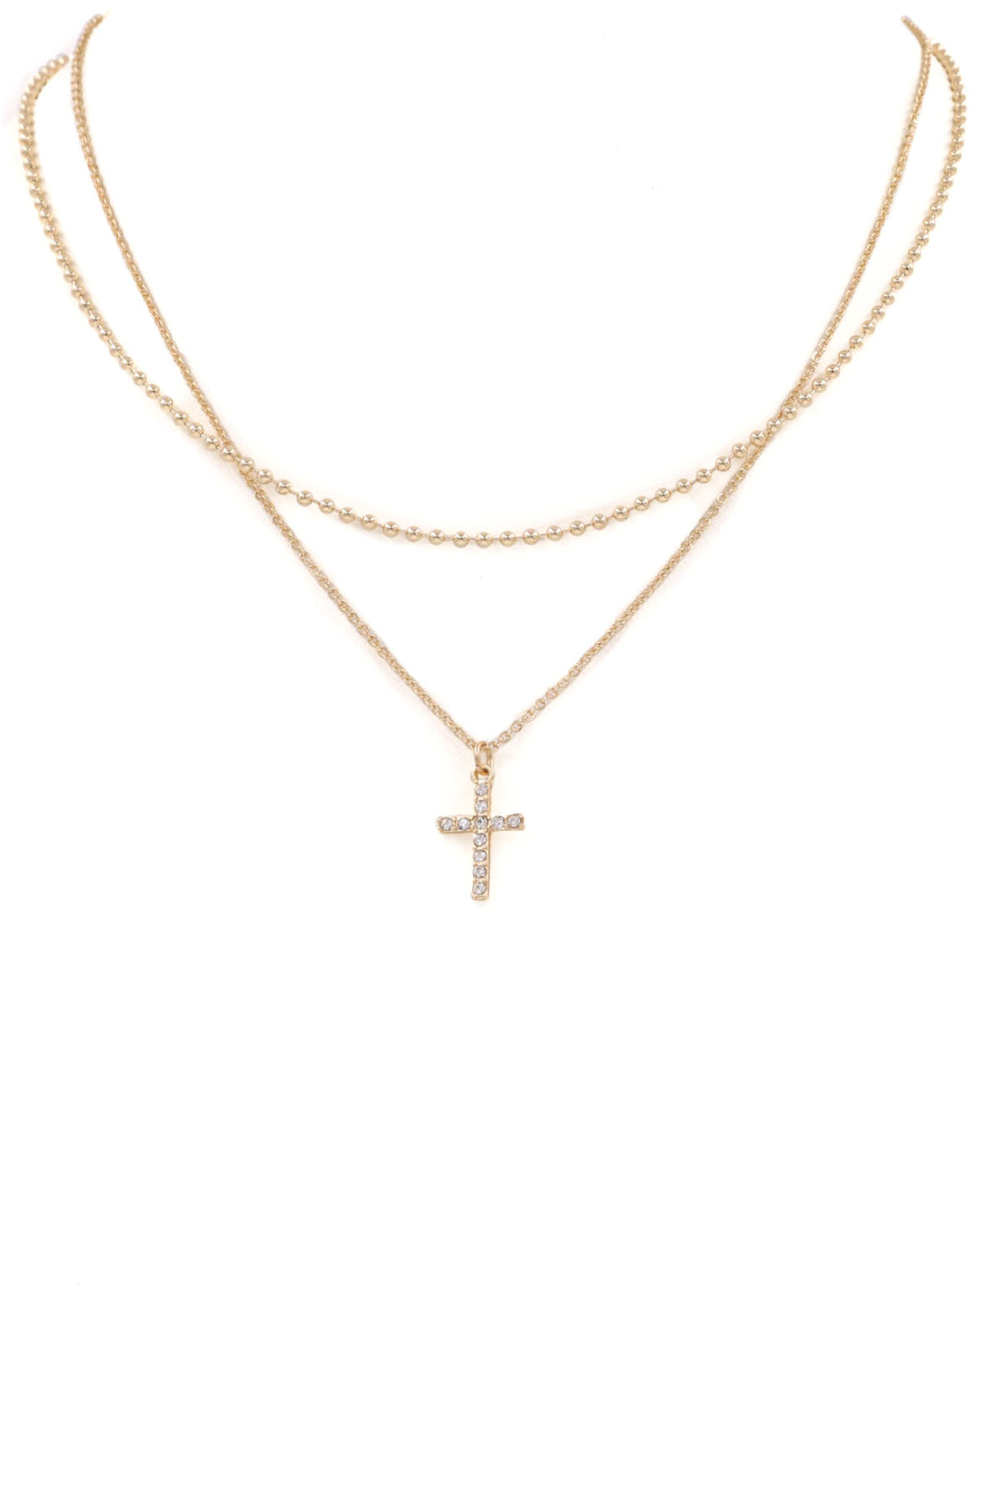 GOLD Rhinestone Cross Necklace - Necklaces